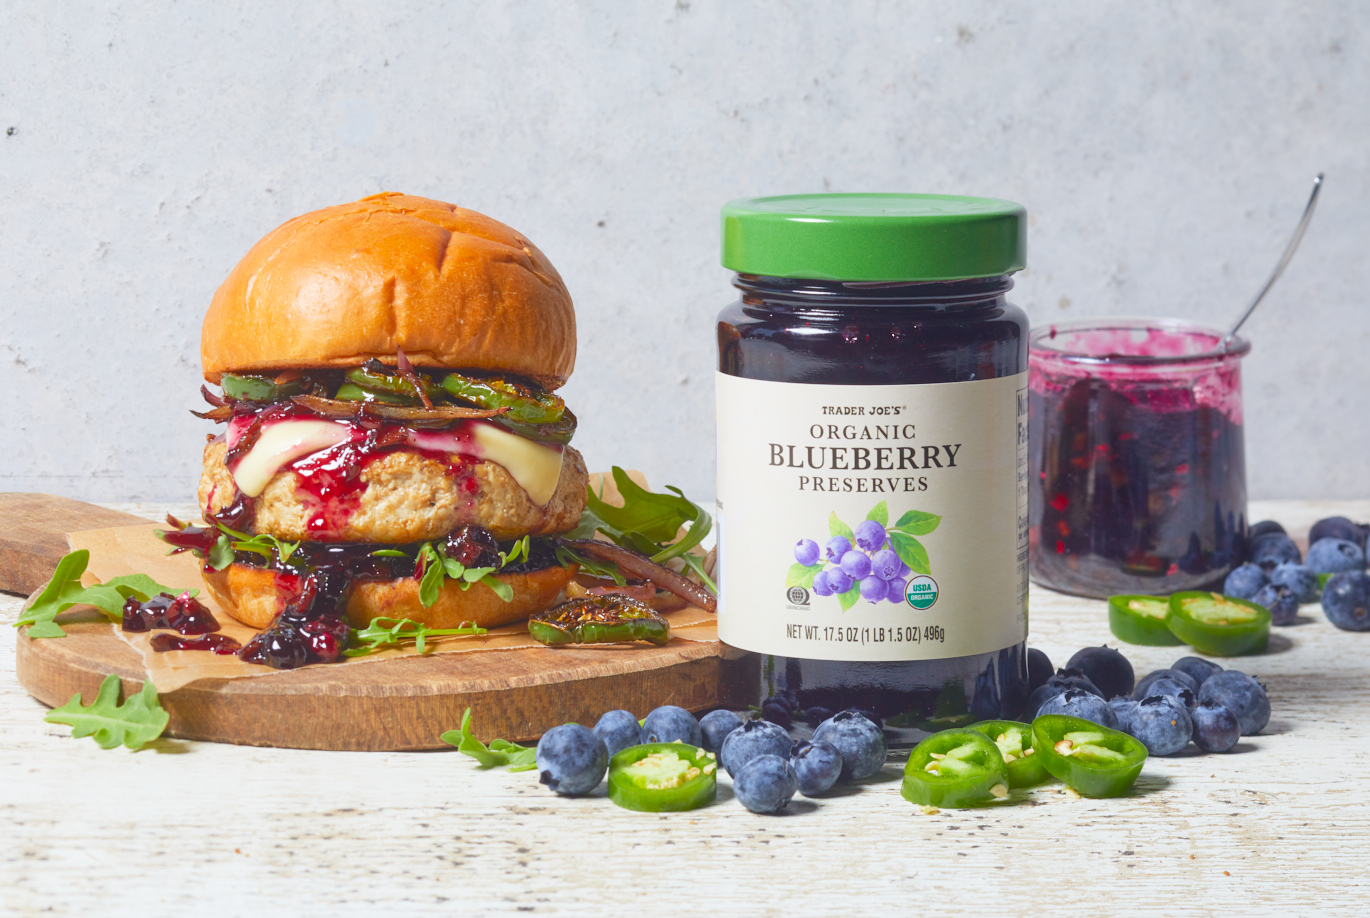 Trader Joe's Organic Blueberry Preserves; topped on a turkey burger with muenster cheese, hot & sweet jalapeño slices and a brioche bun; fresh blueberries and slices of jalapeño on surface